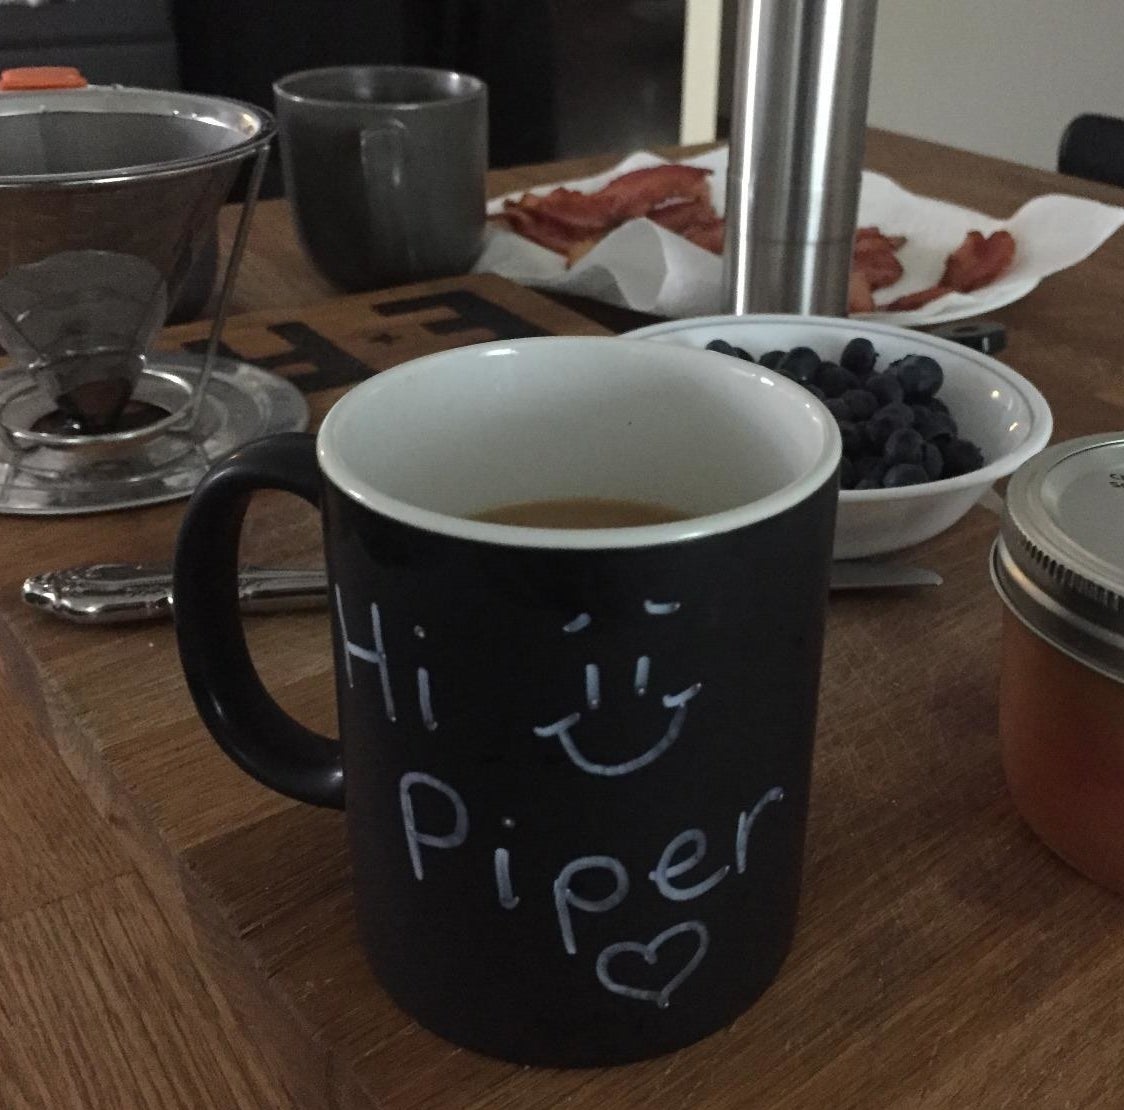 Reviewer photo of the chalkboard mug on a breakfast table with the words &quot;Hi Piper&quot; written on it